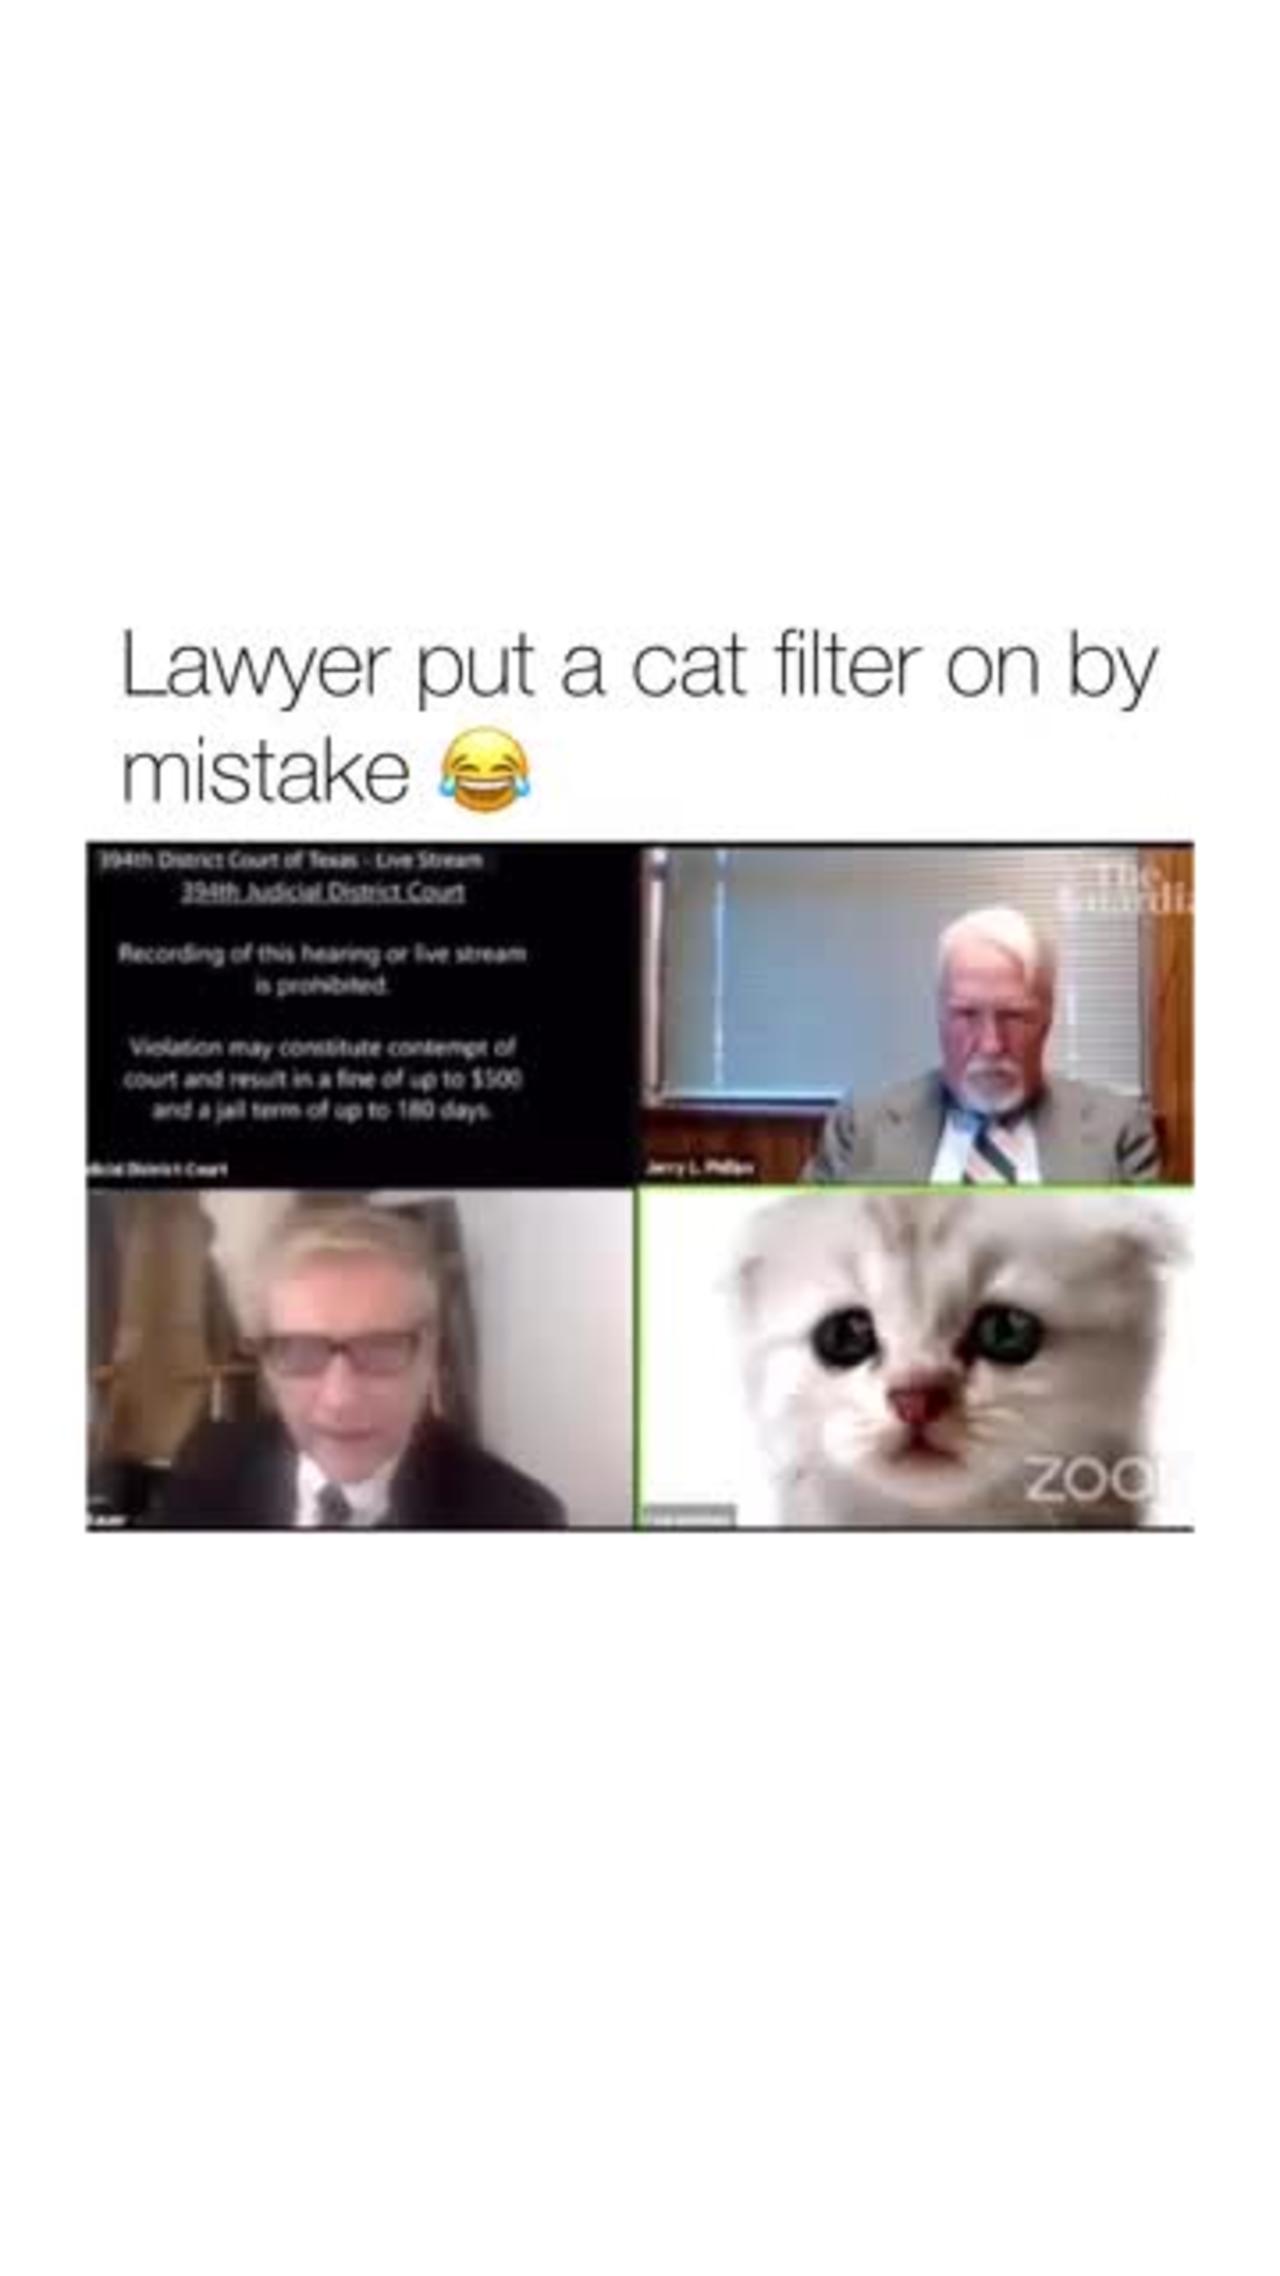 Lawyer filter as a cat in front of judge on Zoom